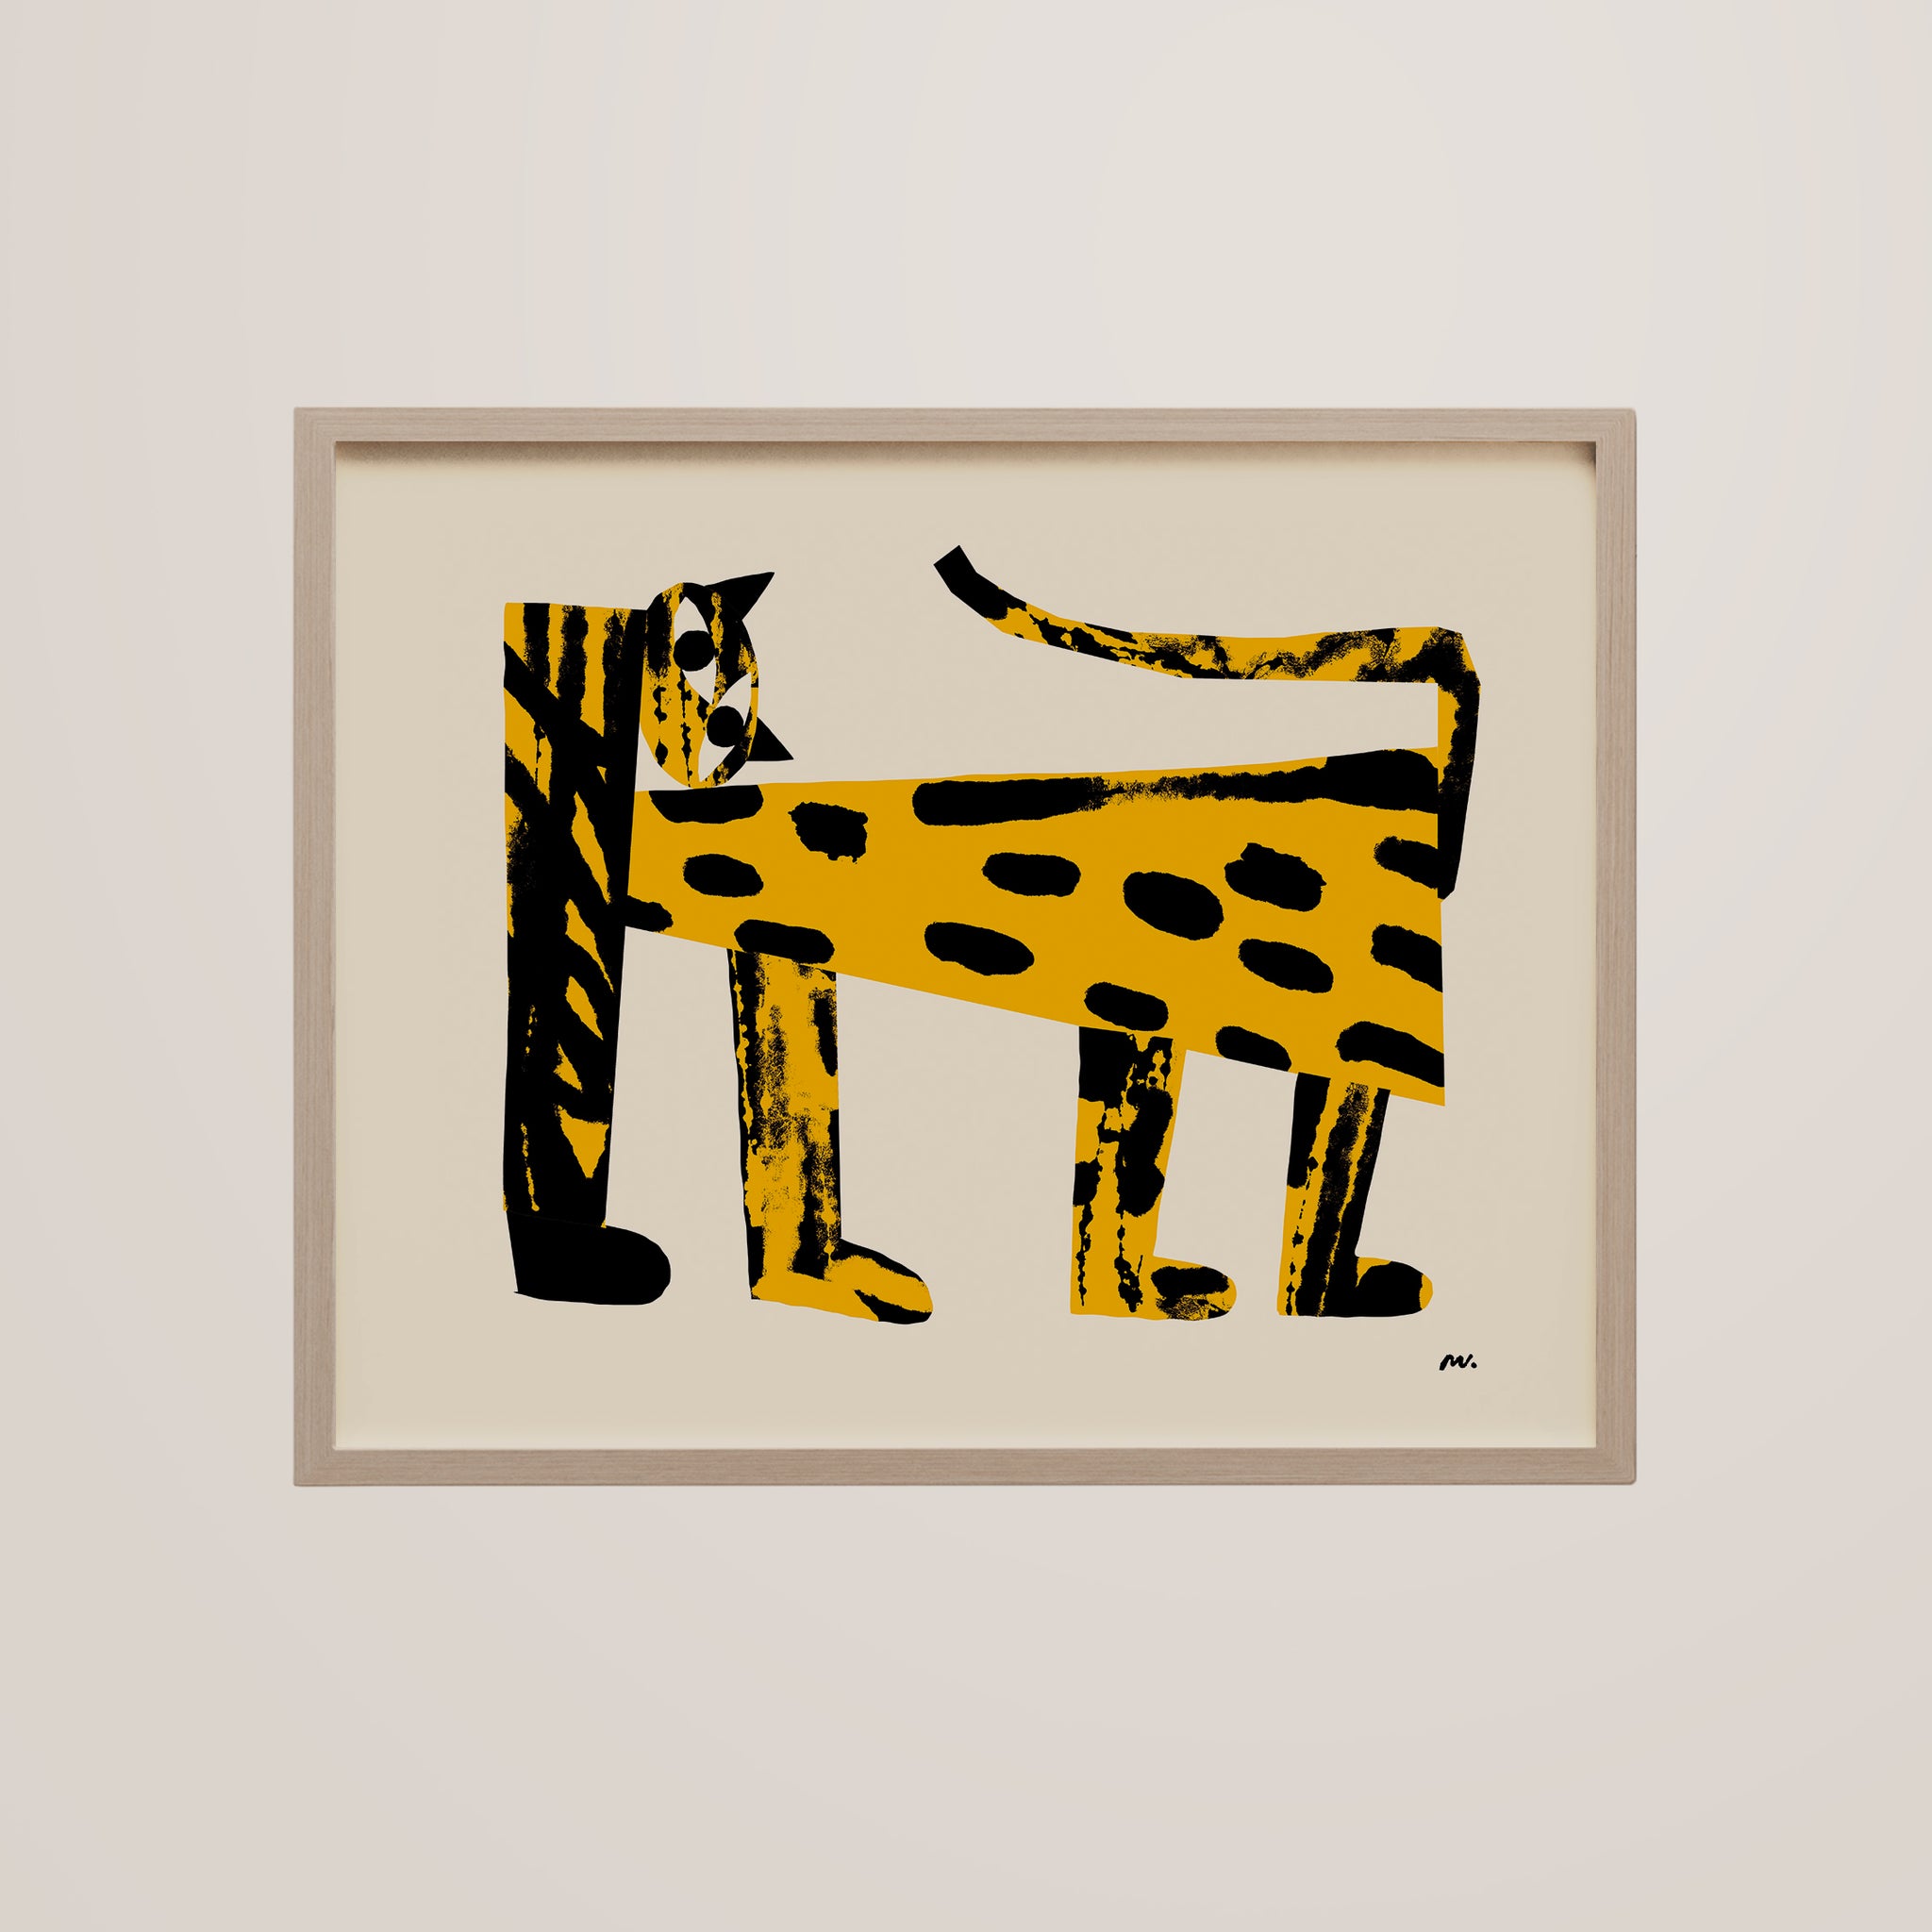 Abstract Leopard